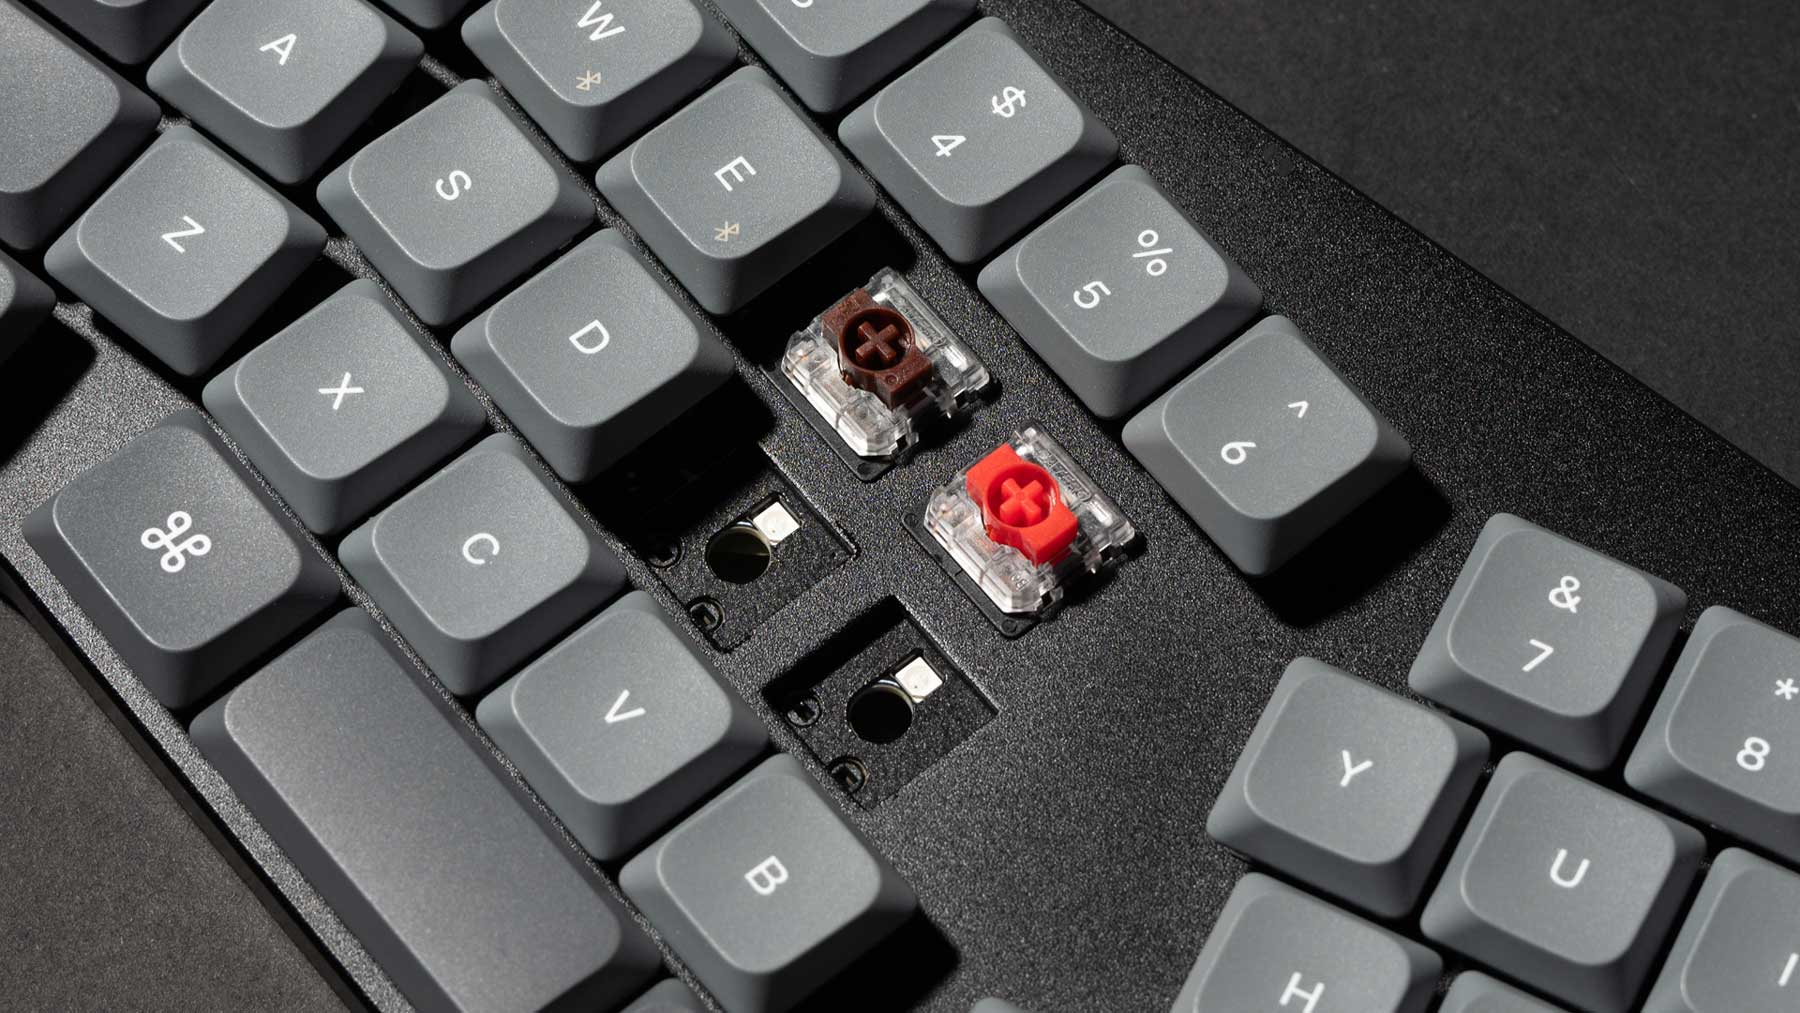 Hot-swappable feature of the Keychron K11 Max Wireless Mechanical Keyboard